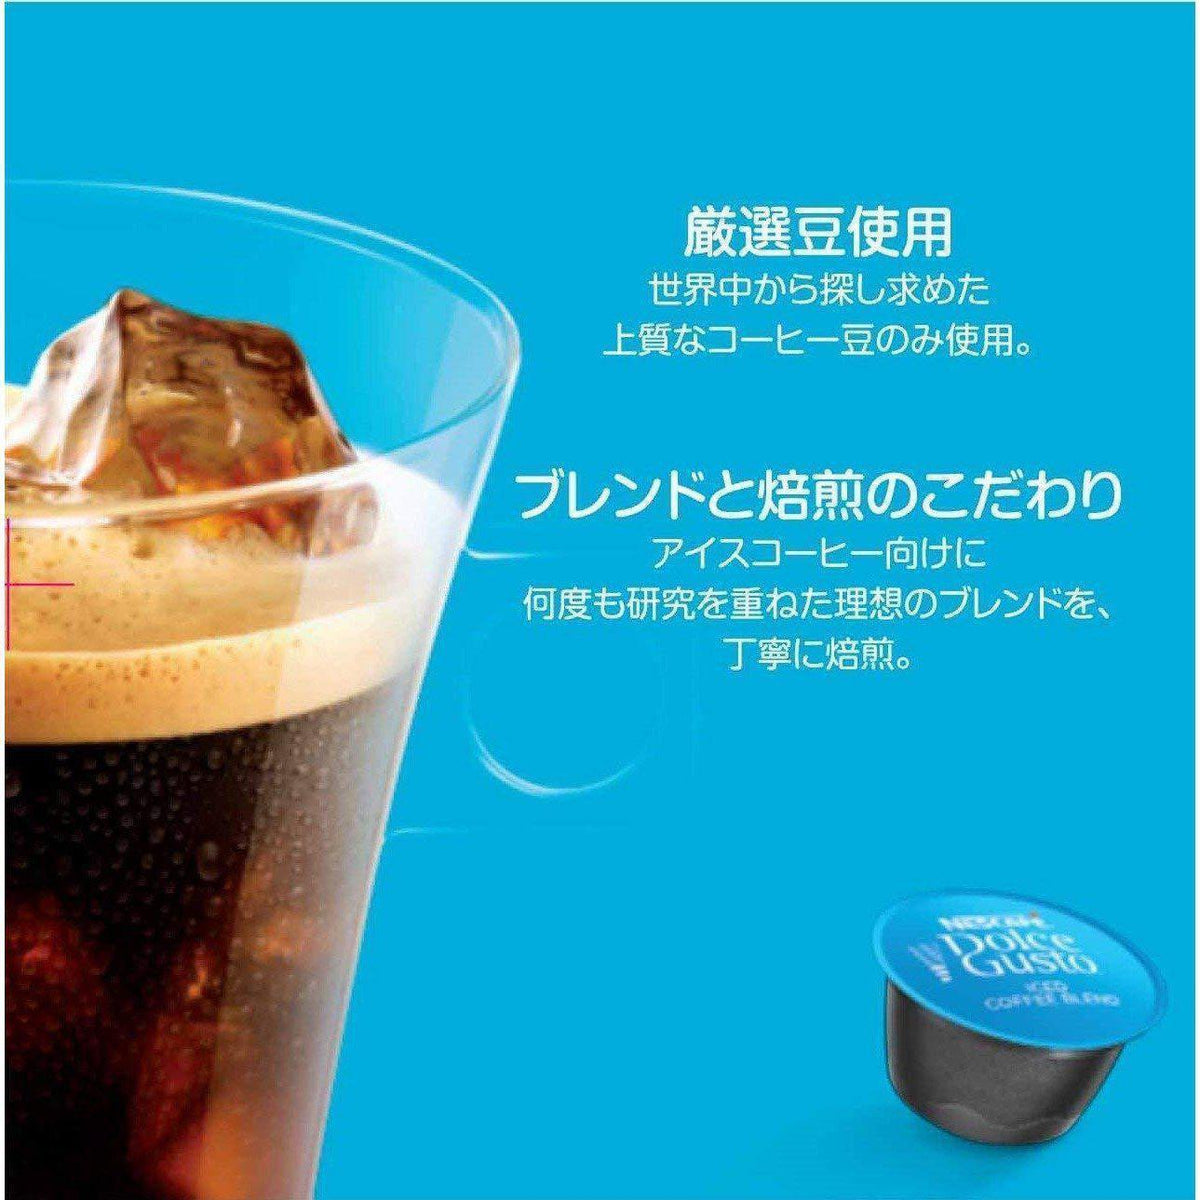 Buy 2 X Nescafe Dolce Gusto Hot Chocolate Collection Limited